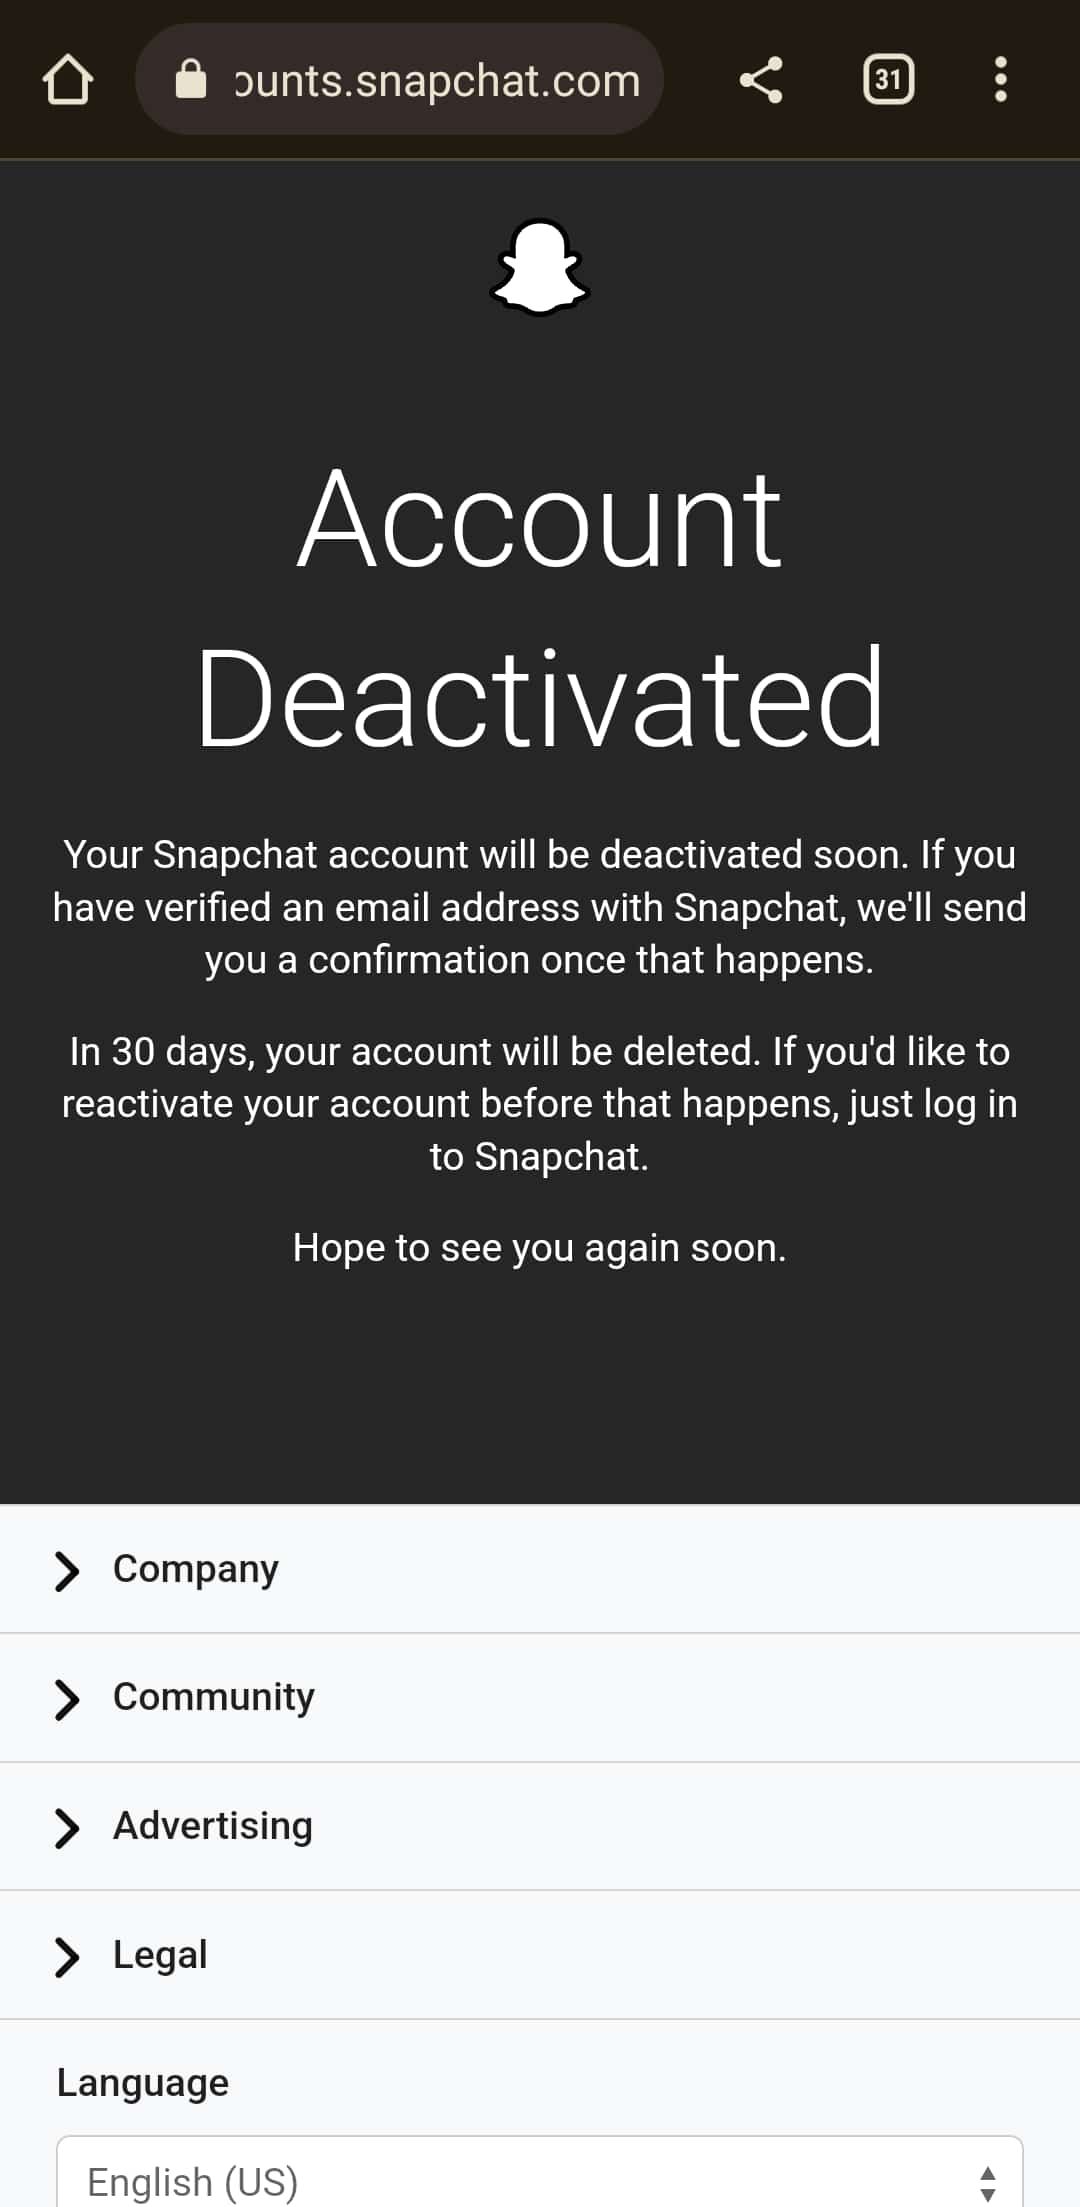 Account Deactivated web page on Snapchat website